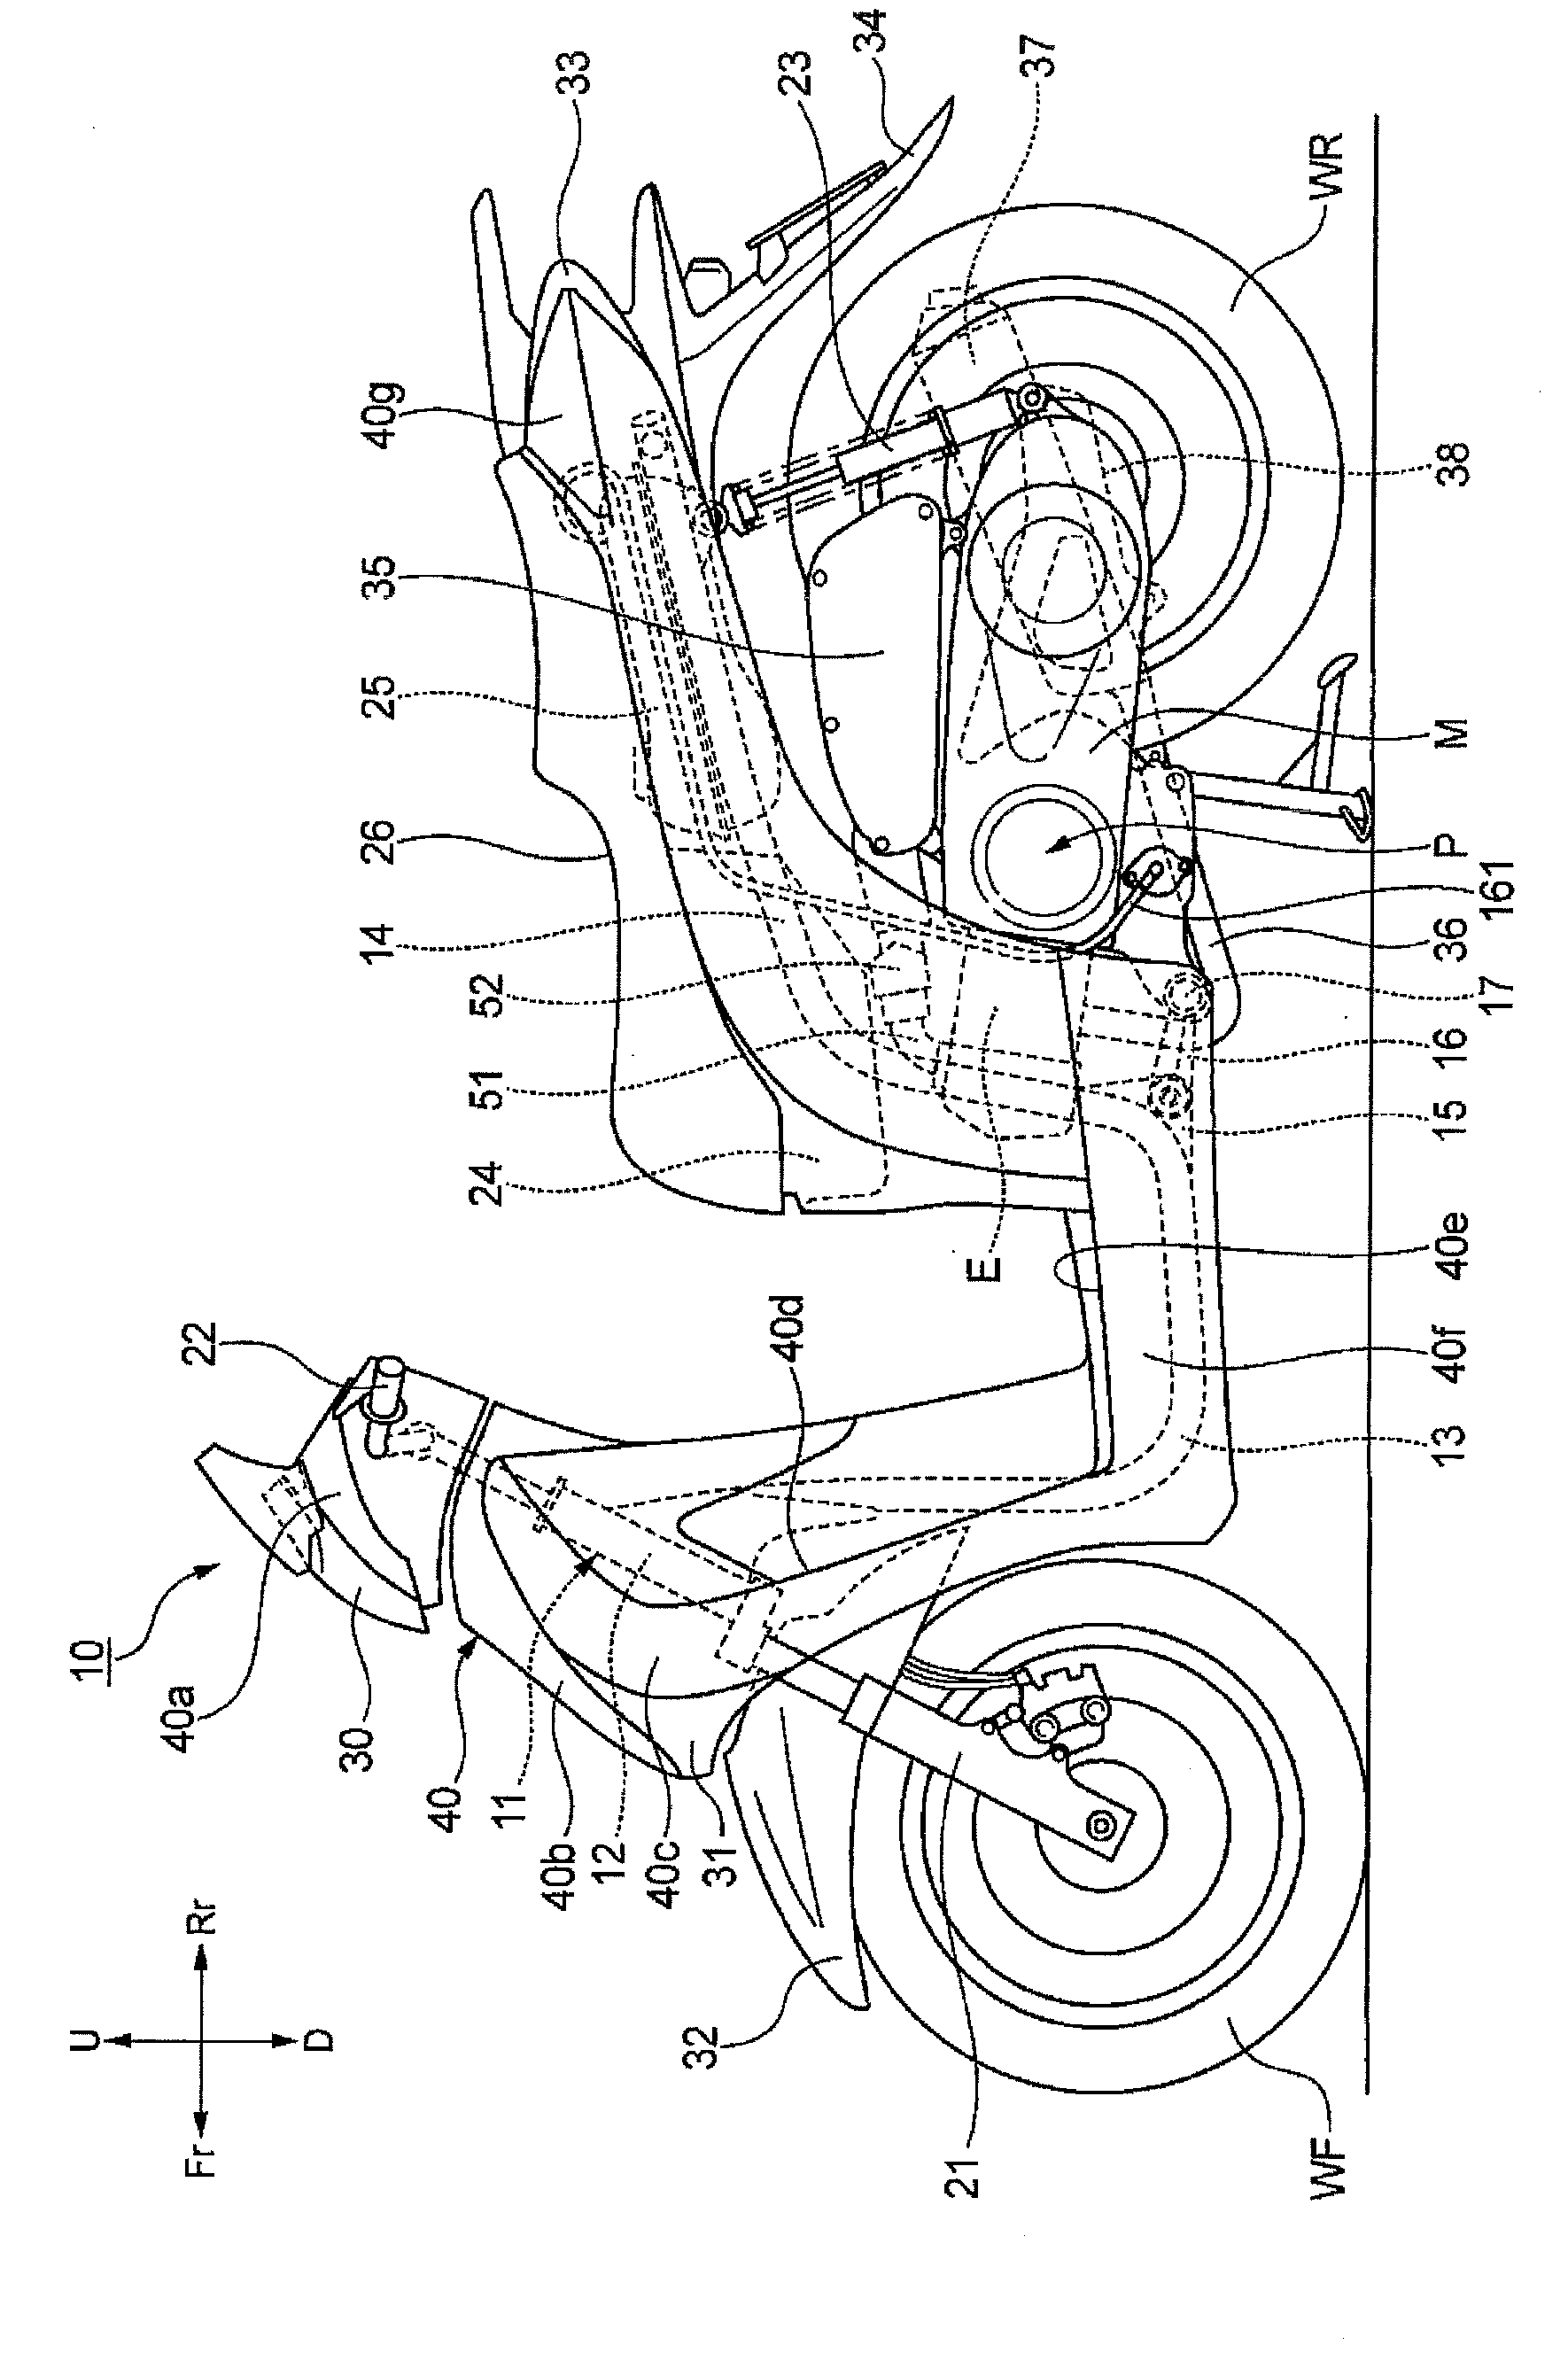 Fuel gas treatment device